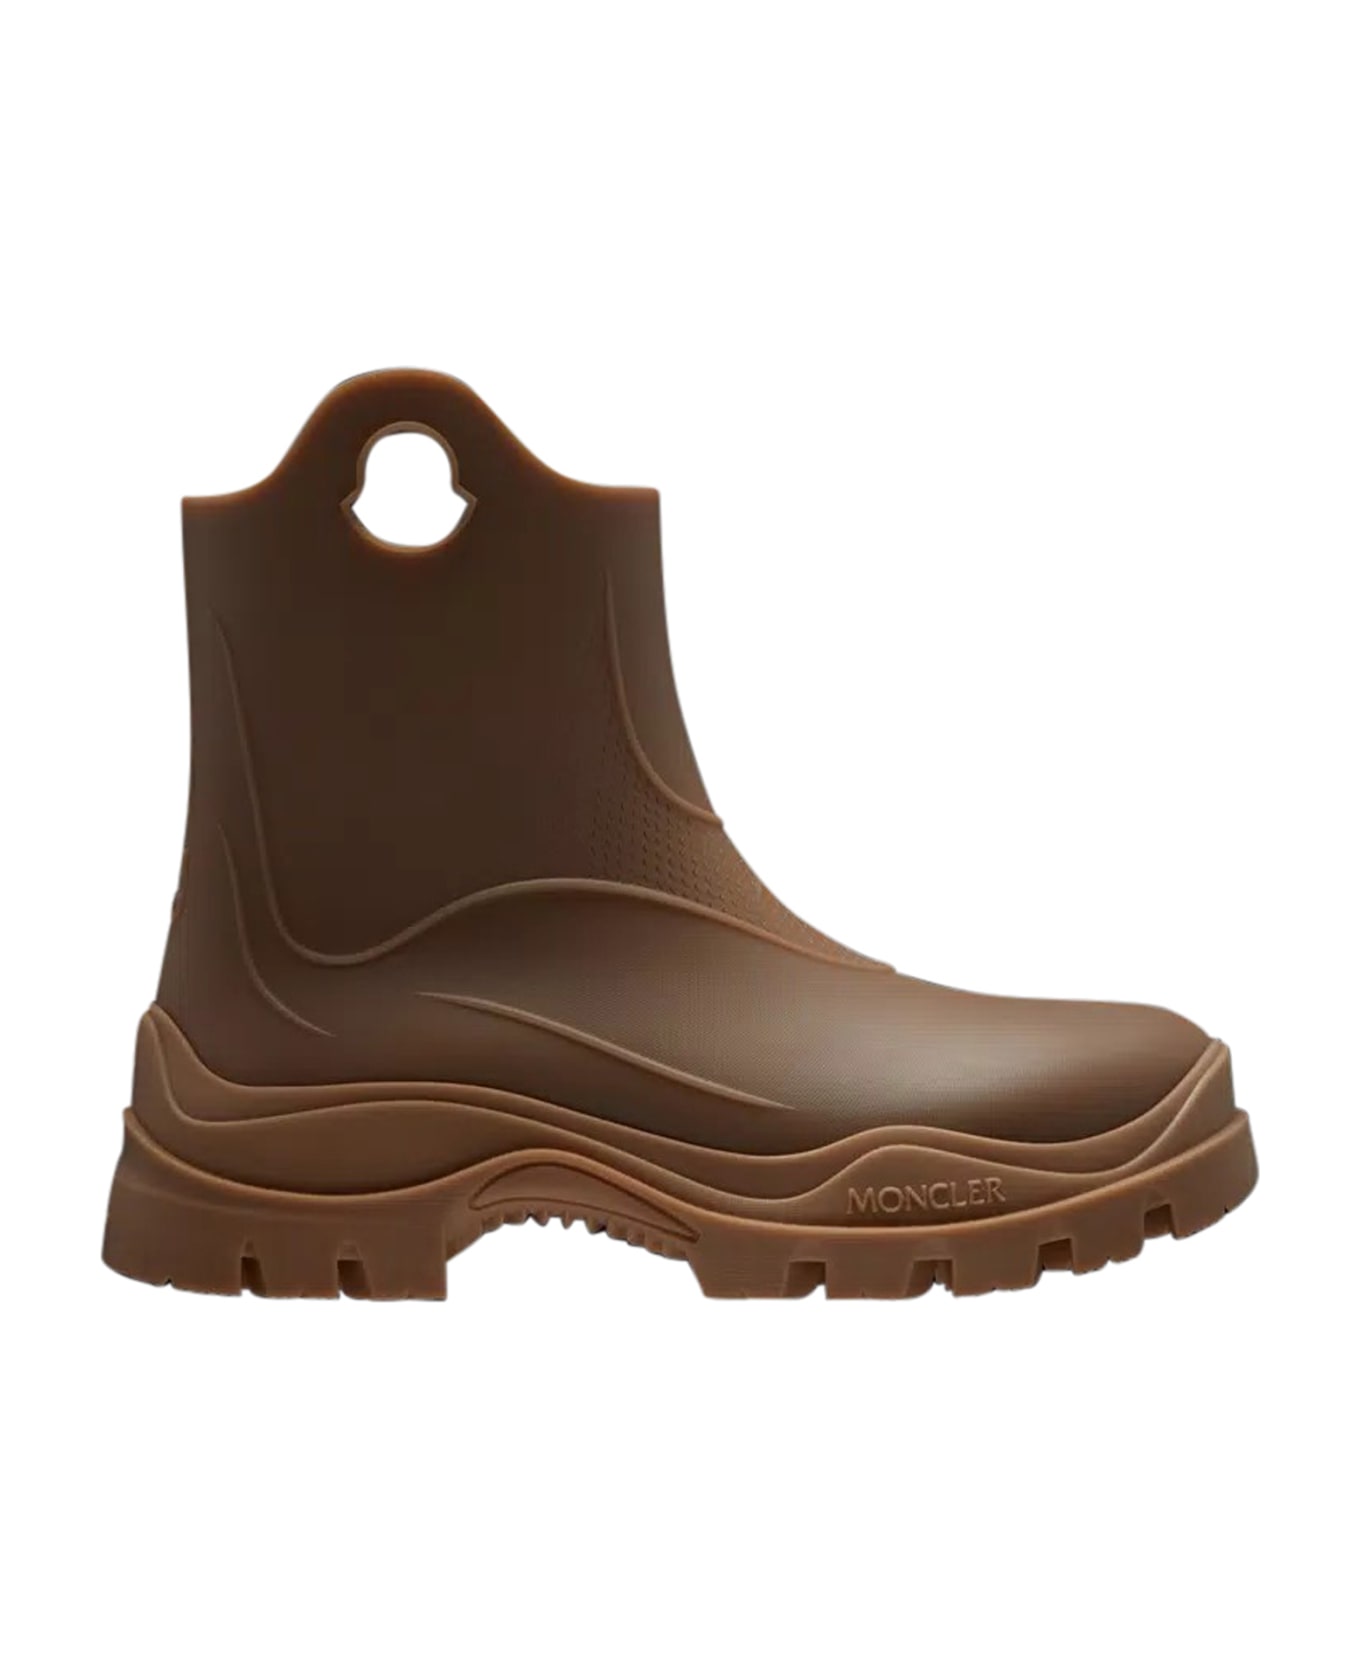 Moncler Misty Rubber Boots - brown ブーツ